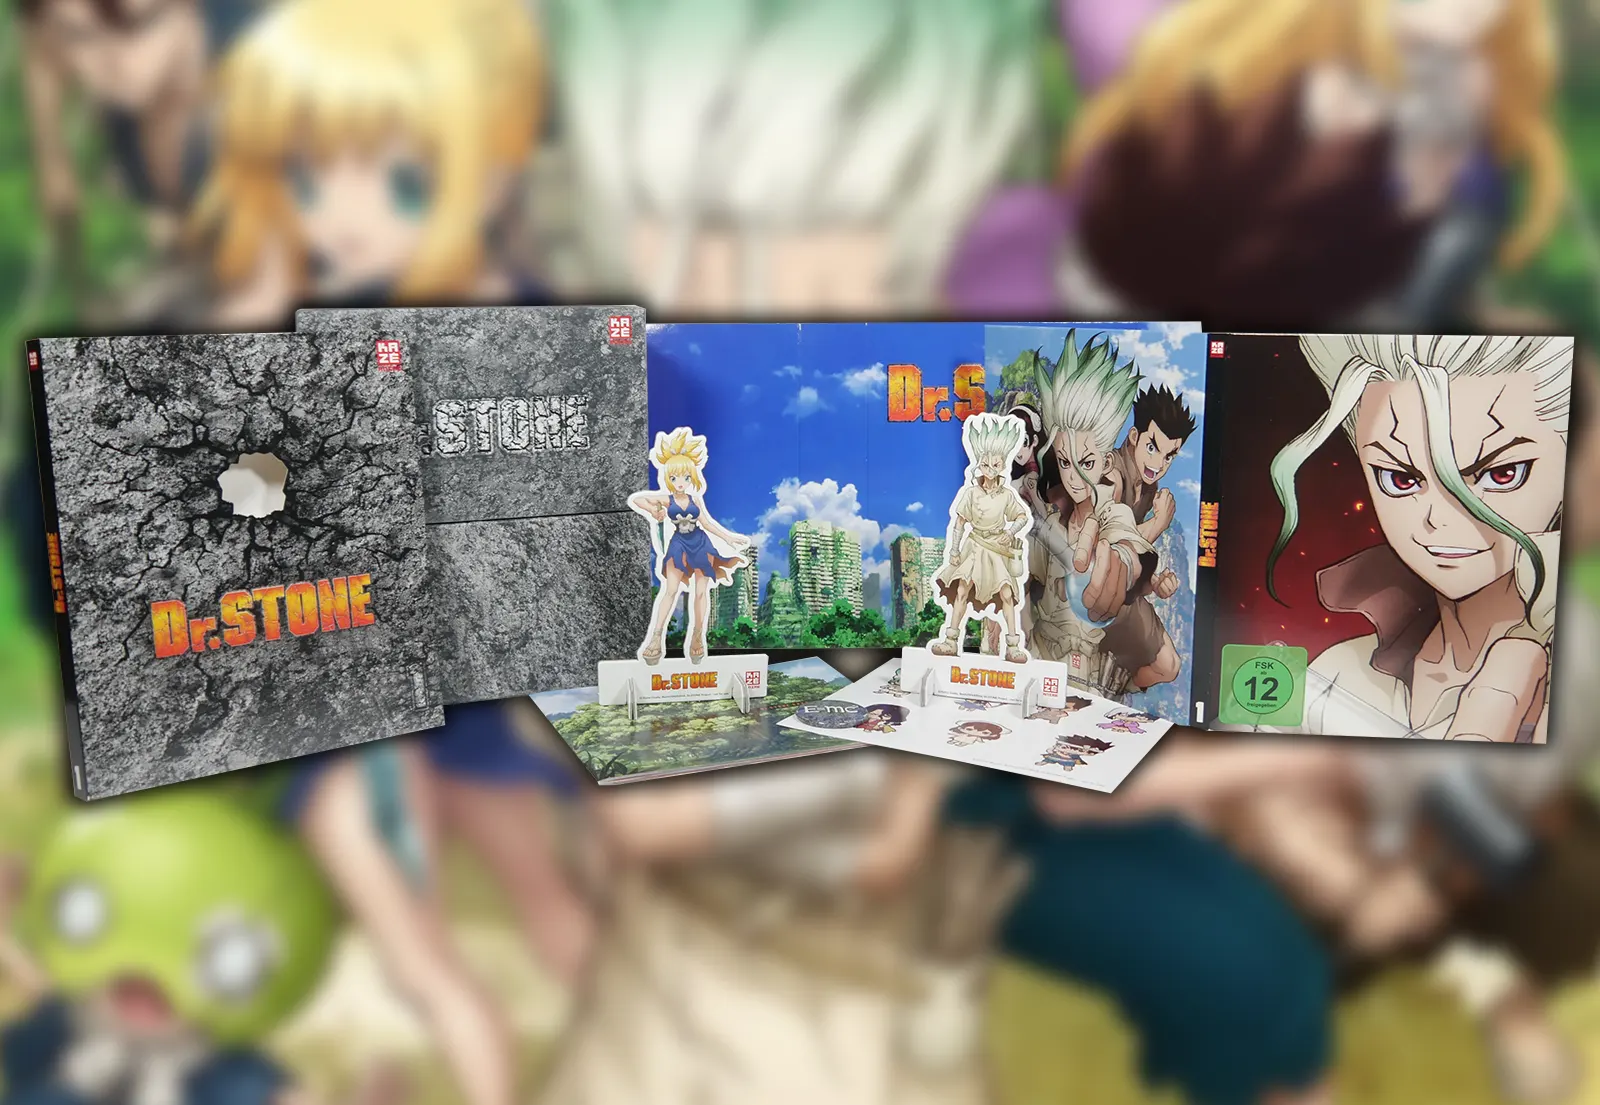 Sci-Fi-Anime Dr. Stone Volume 1 - Review